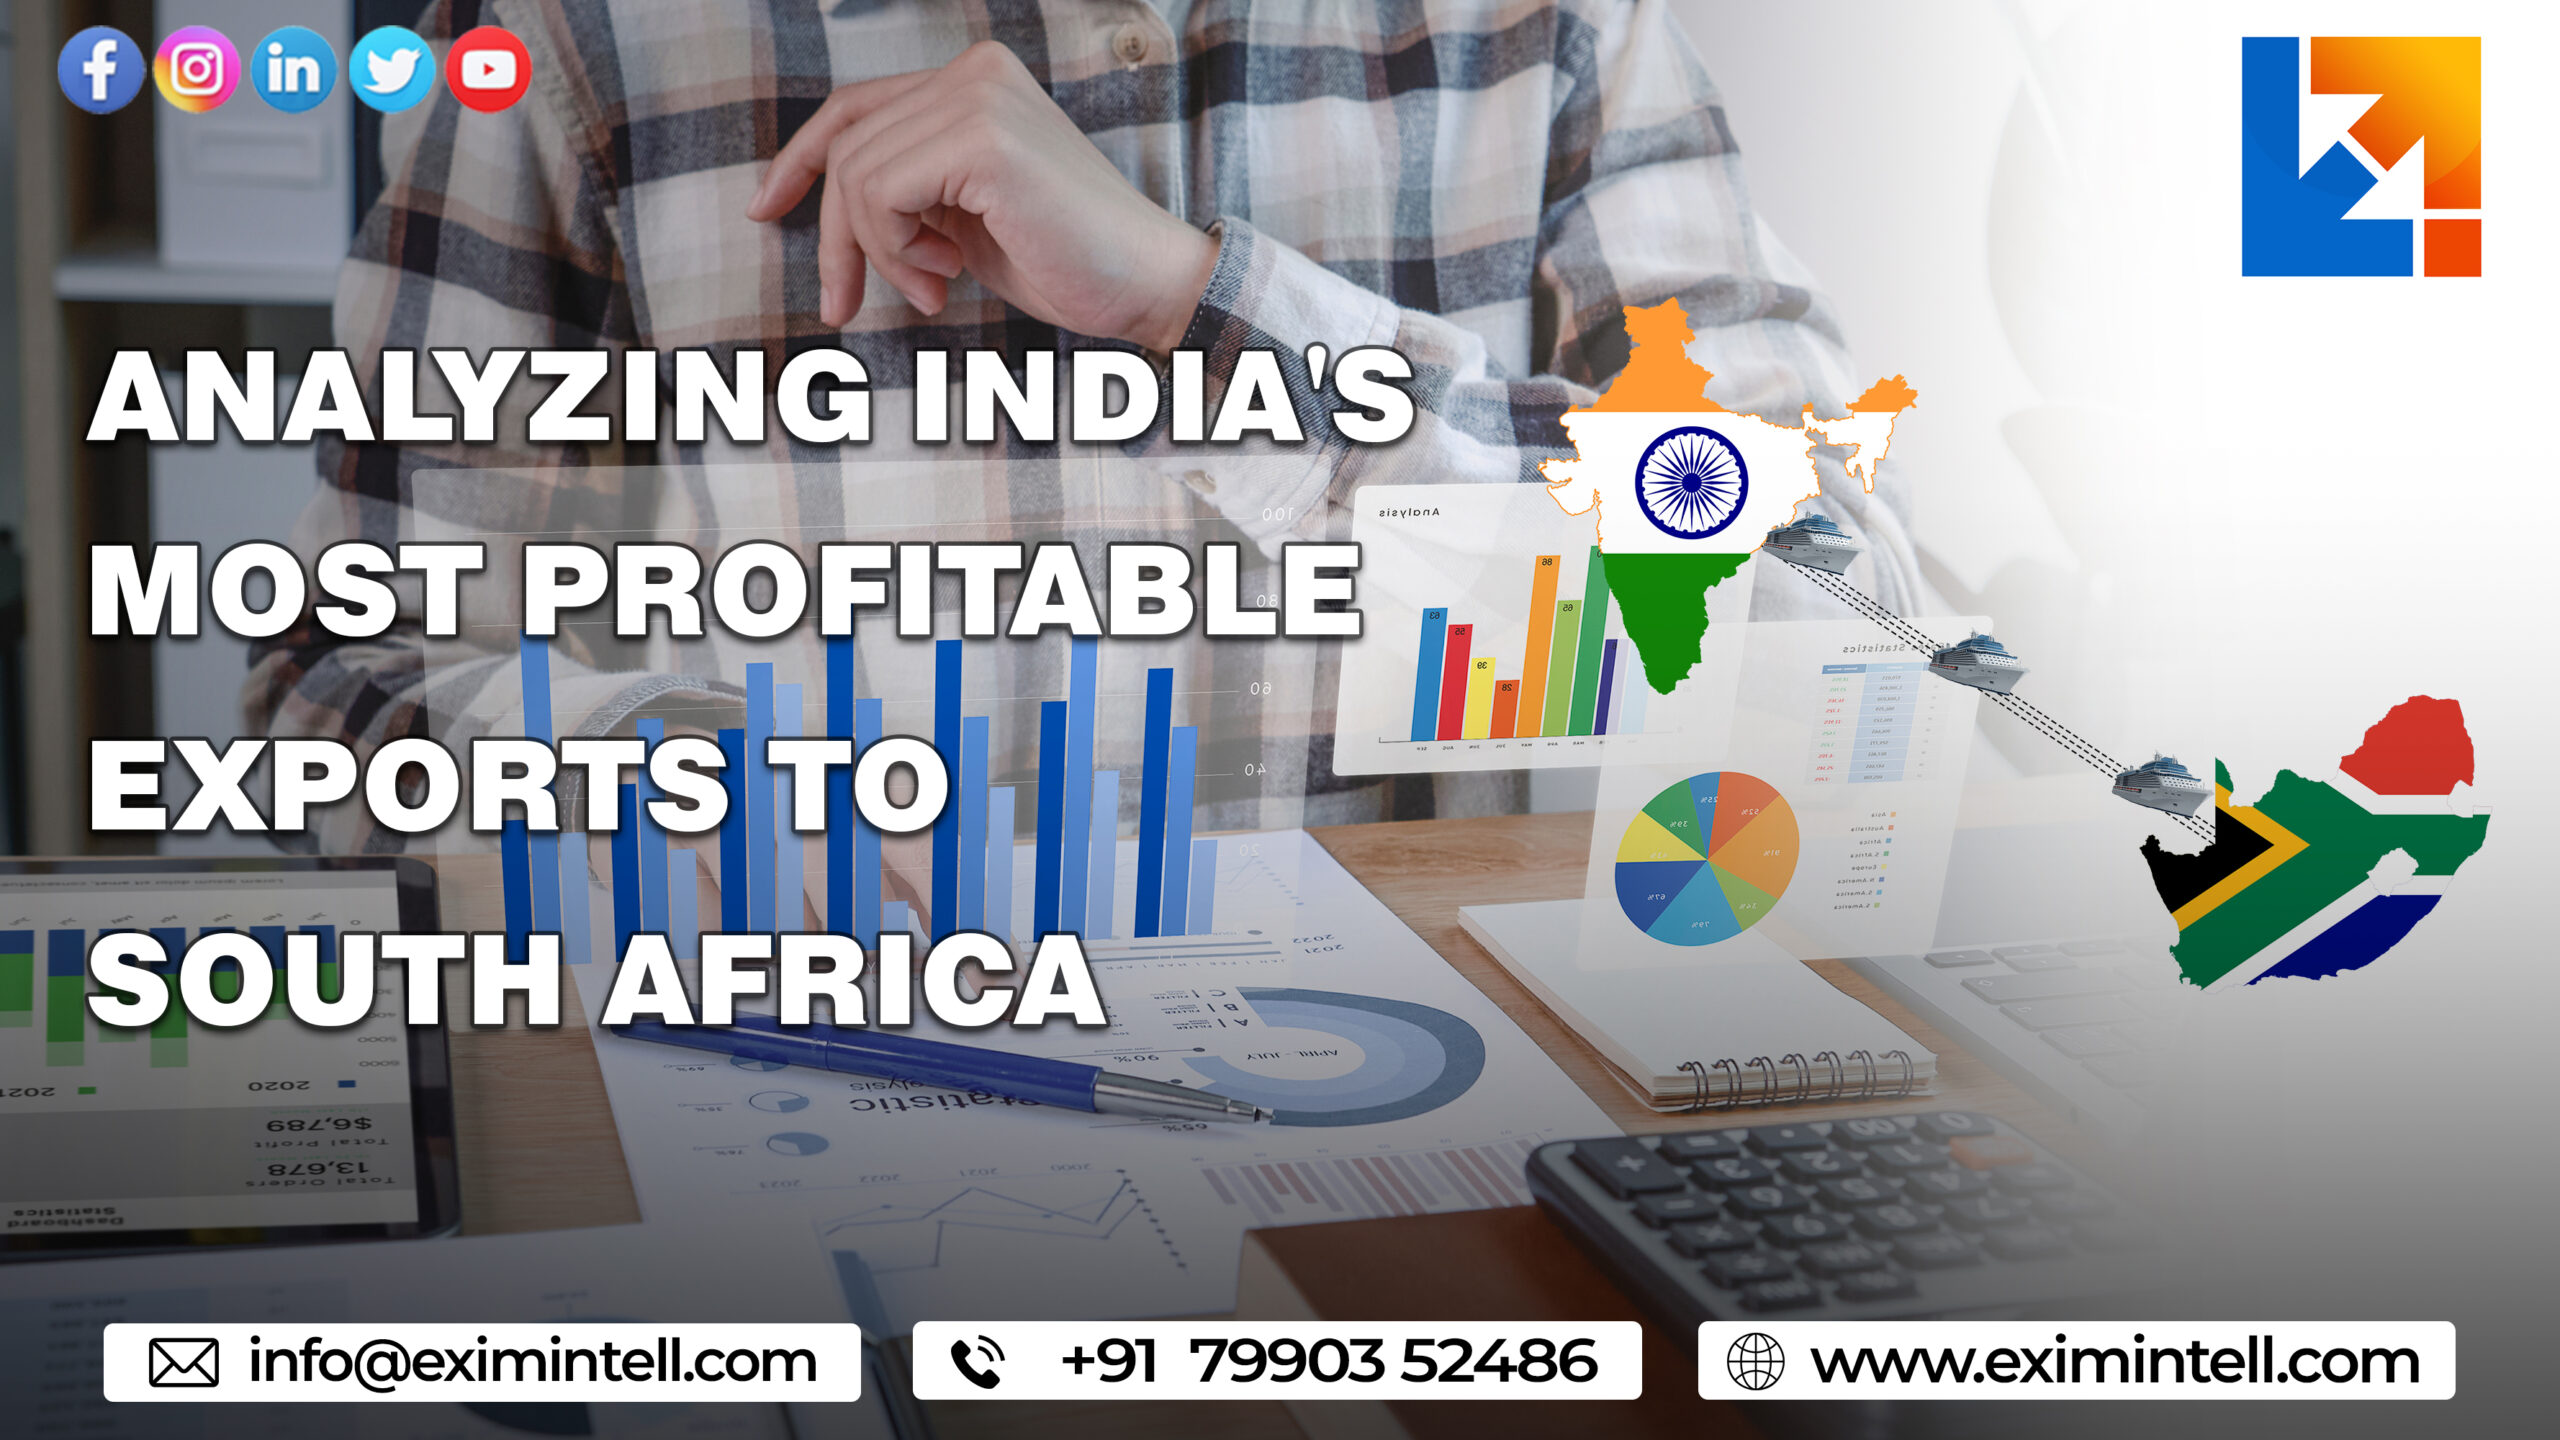 Analyzing India’s Most Profitable Exports to South Africa